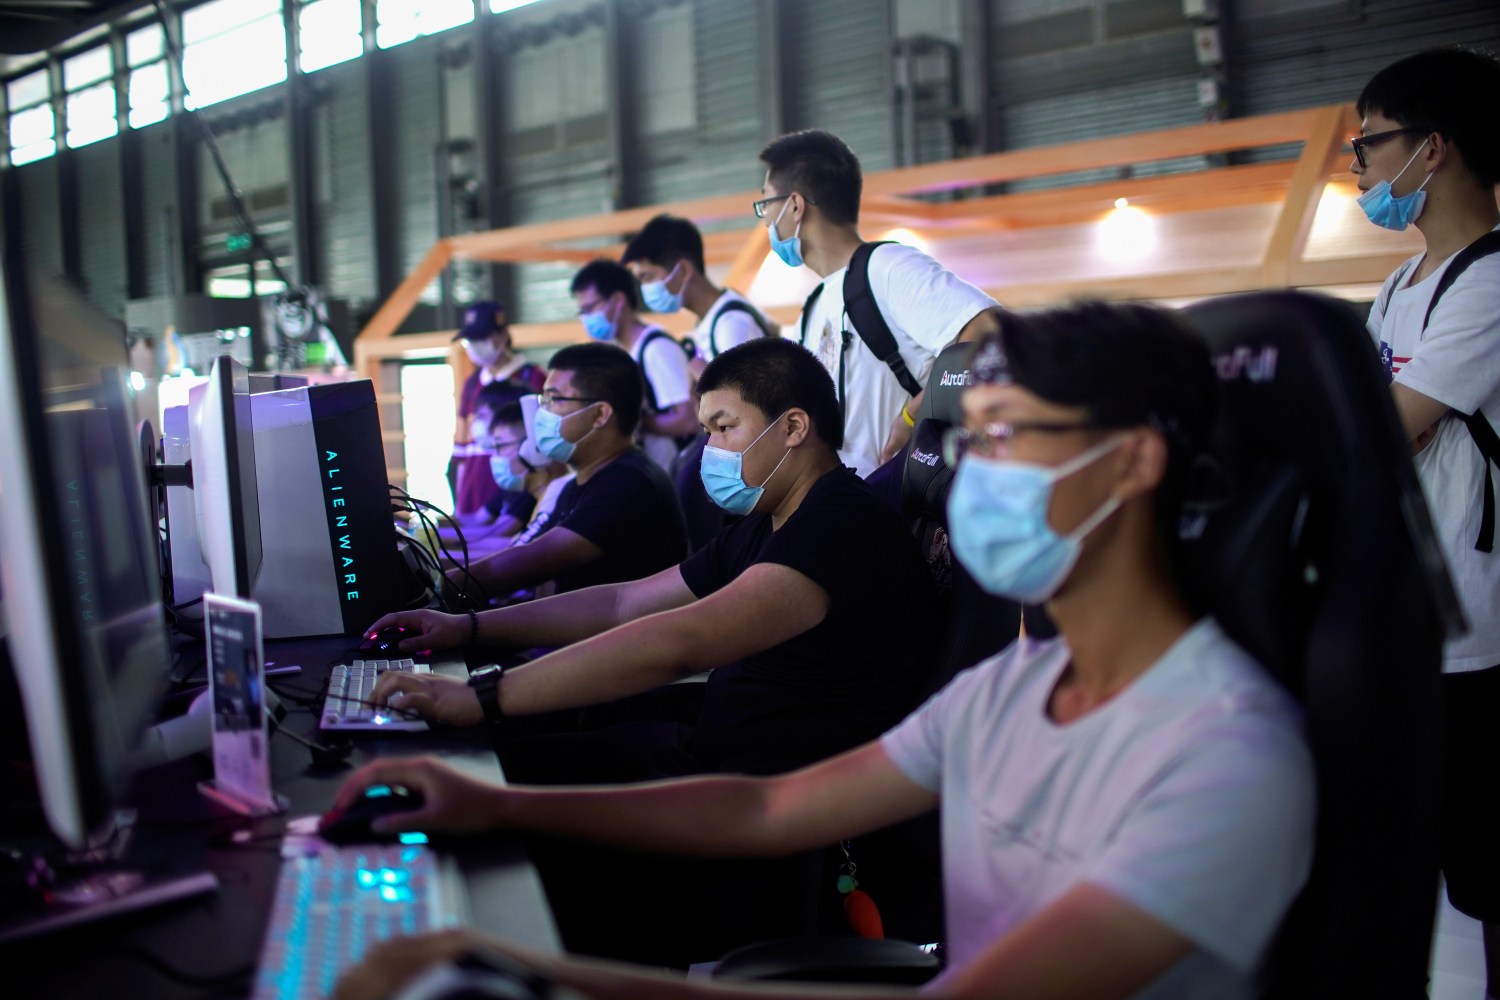 People wearing protective face masks play computer games at the China Digital Entertainment Expo and Conference (ChinaJoy) in Shanghai, following the coronavirus disease (COVID-19) outbreak, China July 31, 2020. REUTERS/Aly Song